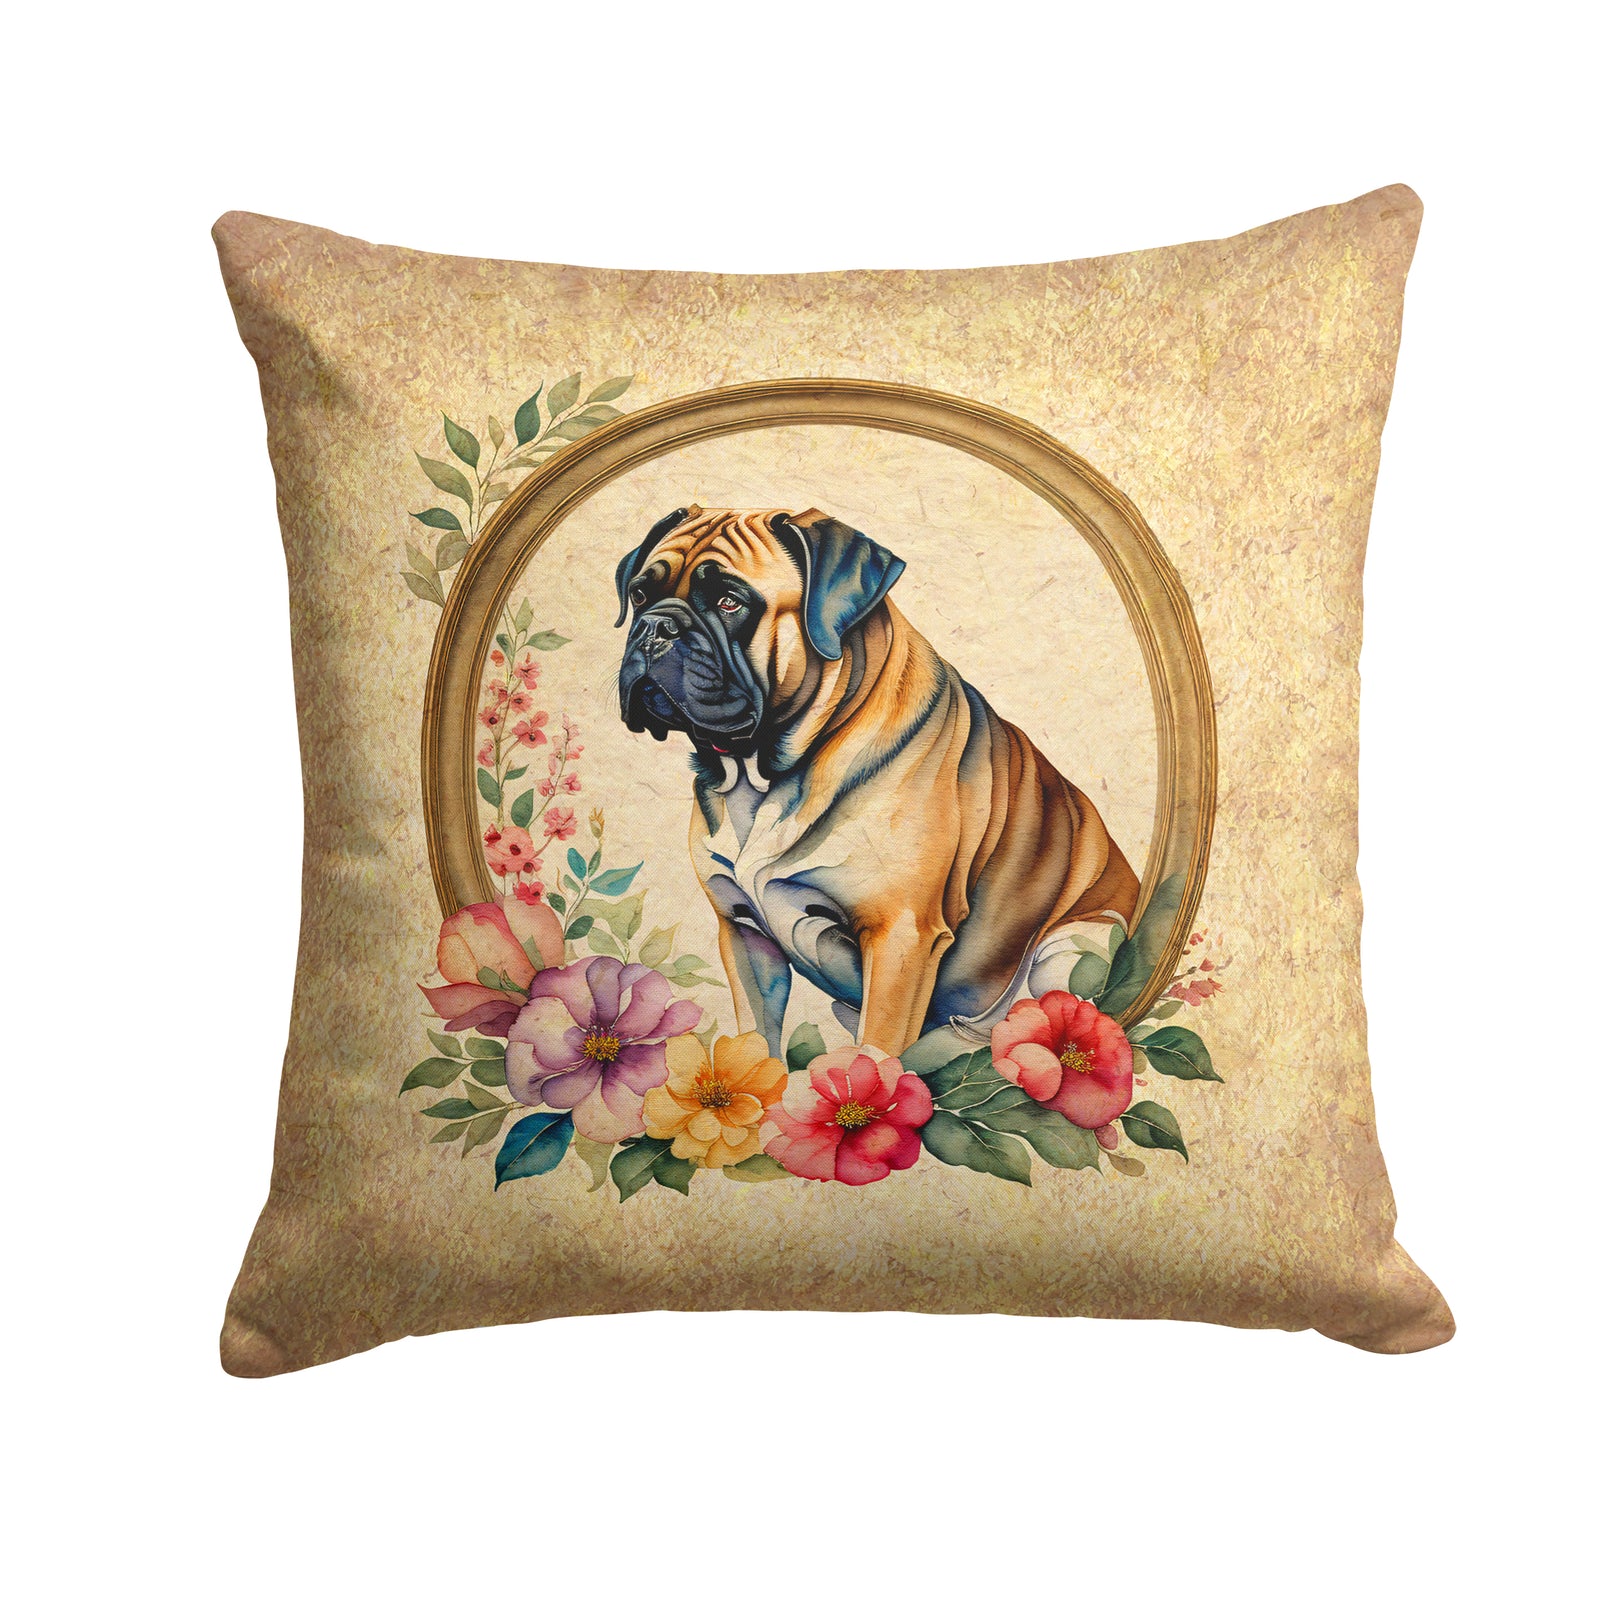 Buy this Mastiff and Flowers Fabric Decorative Pillow